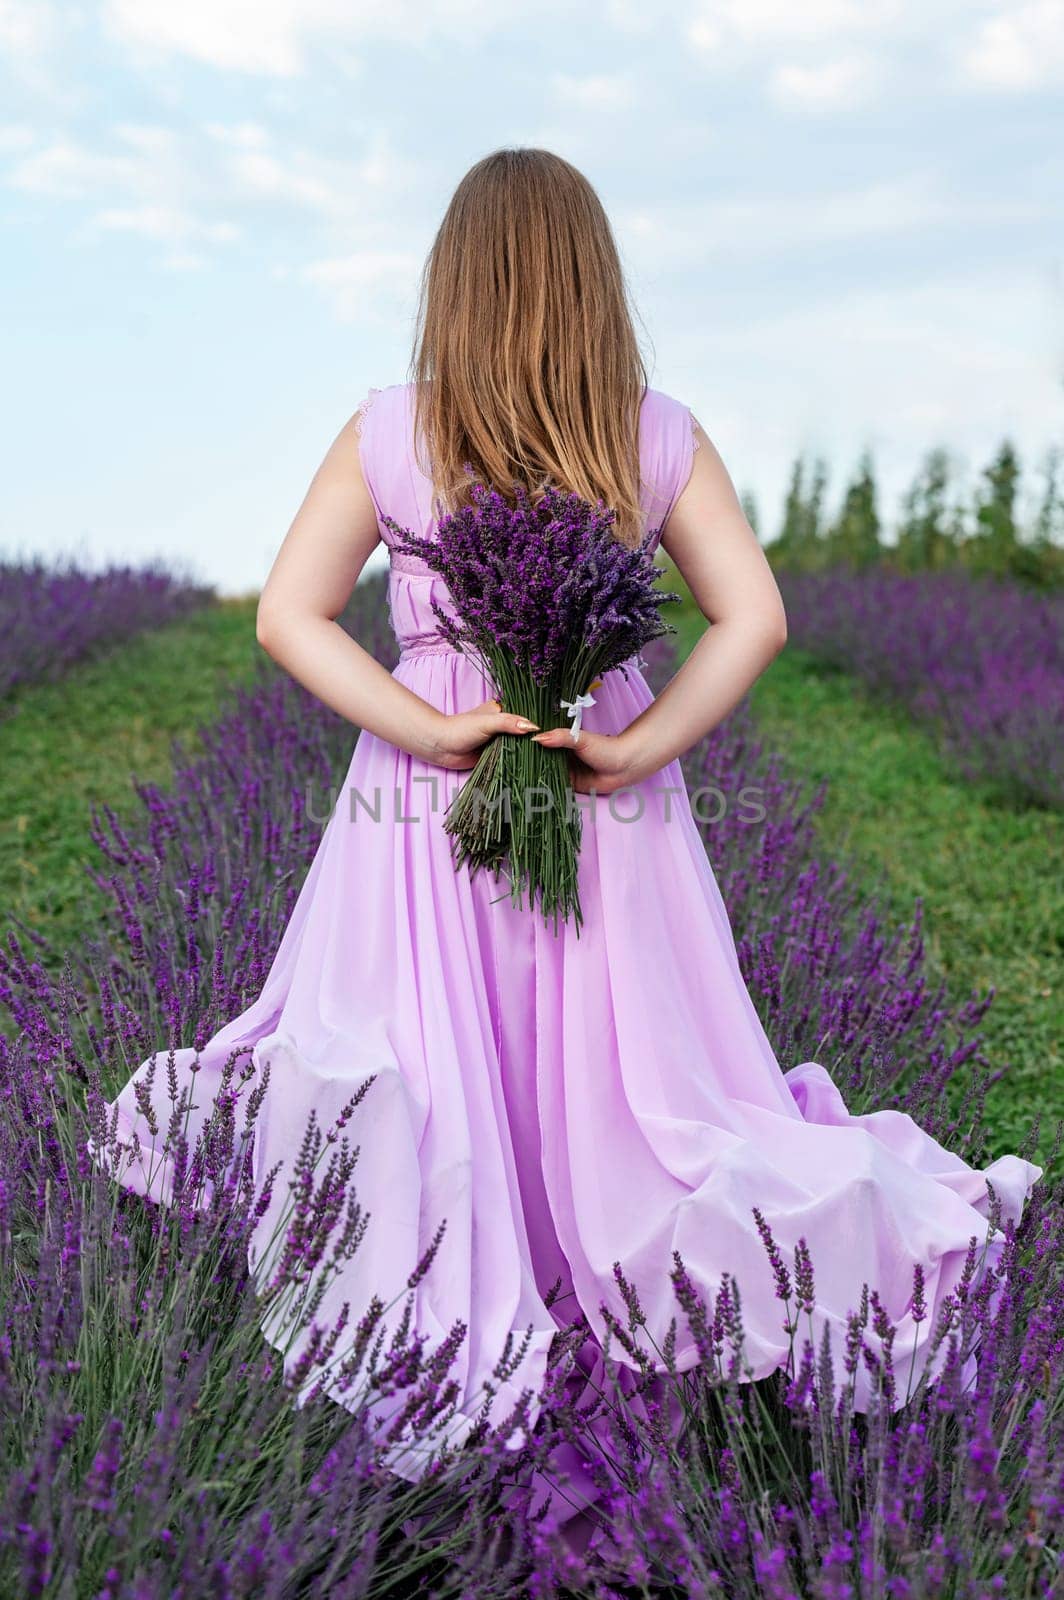 A bouquet of lavender and a girl in a purple dress, back view of the girl. by Niko_Cingaryuk